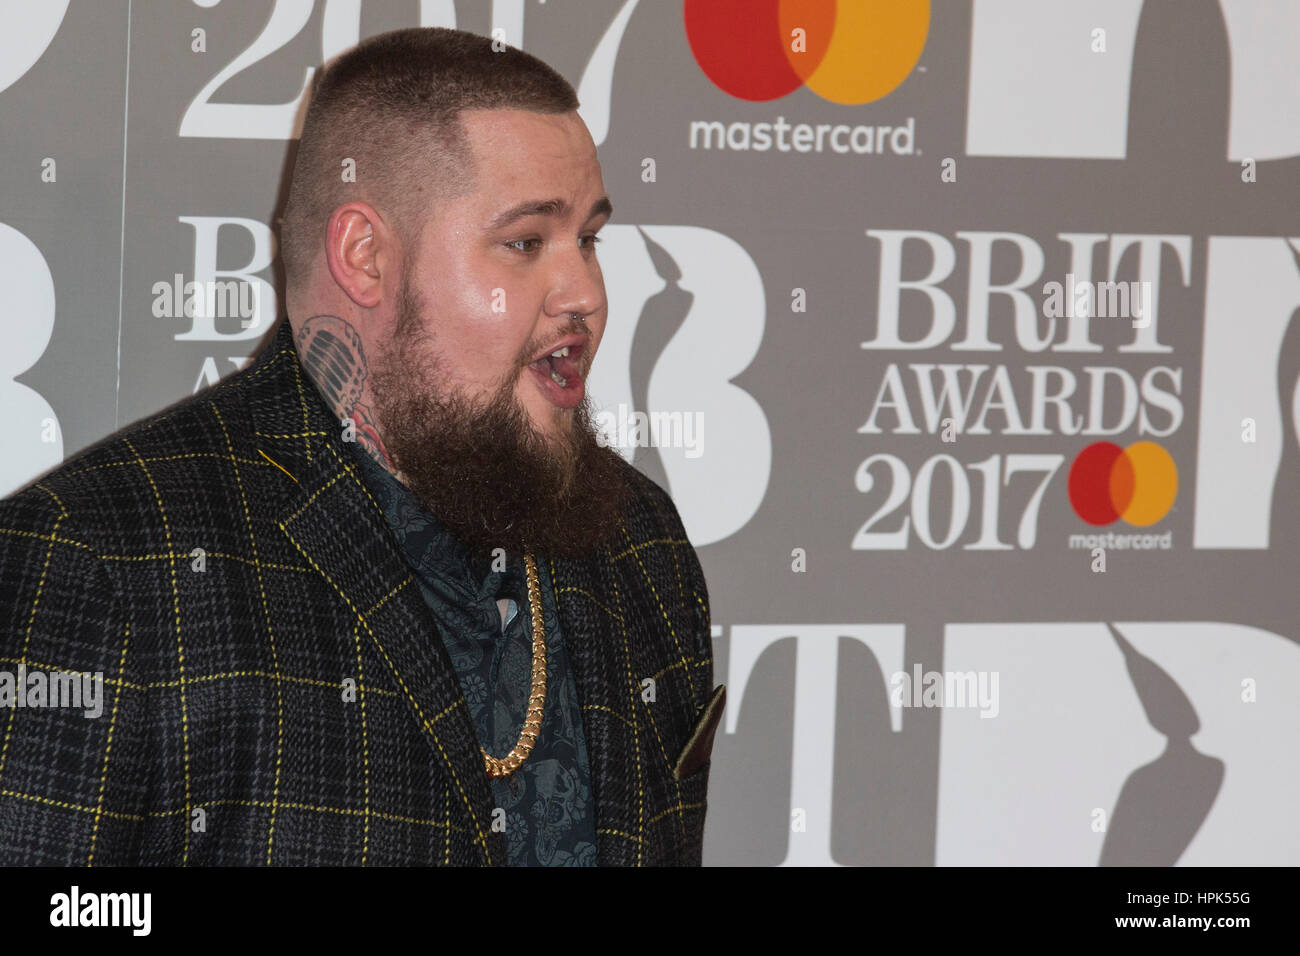 London, UK. 22nd Feb, 2017. Rag 'n' Bone Man (Rory Graham). Red carpet arrivals for the 2017 BRIT Awards at the O2 Arena. Credit: Bettina Strenske/Alamy Live News Stock Photo